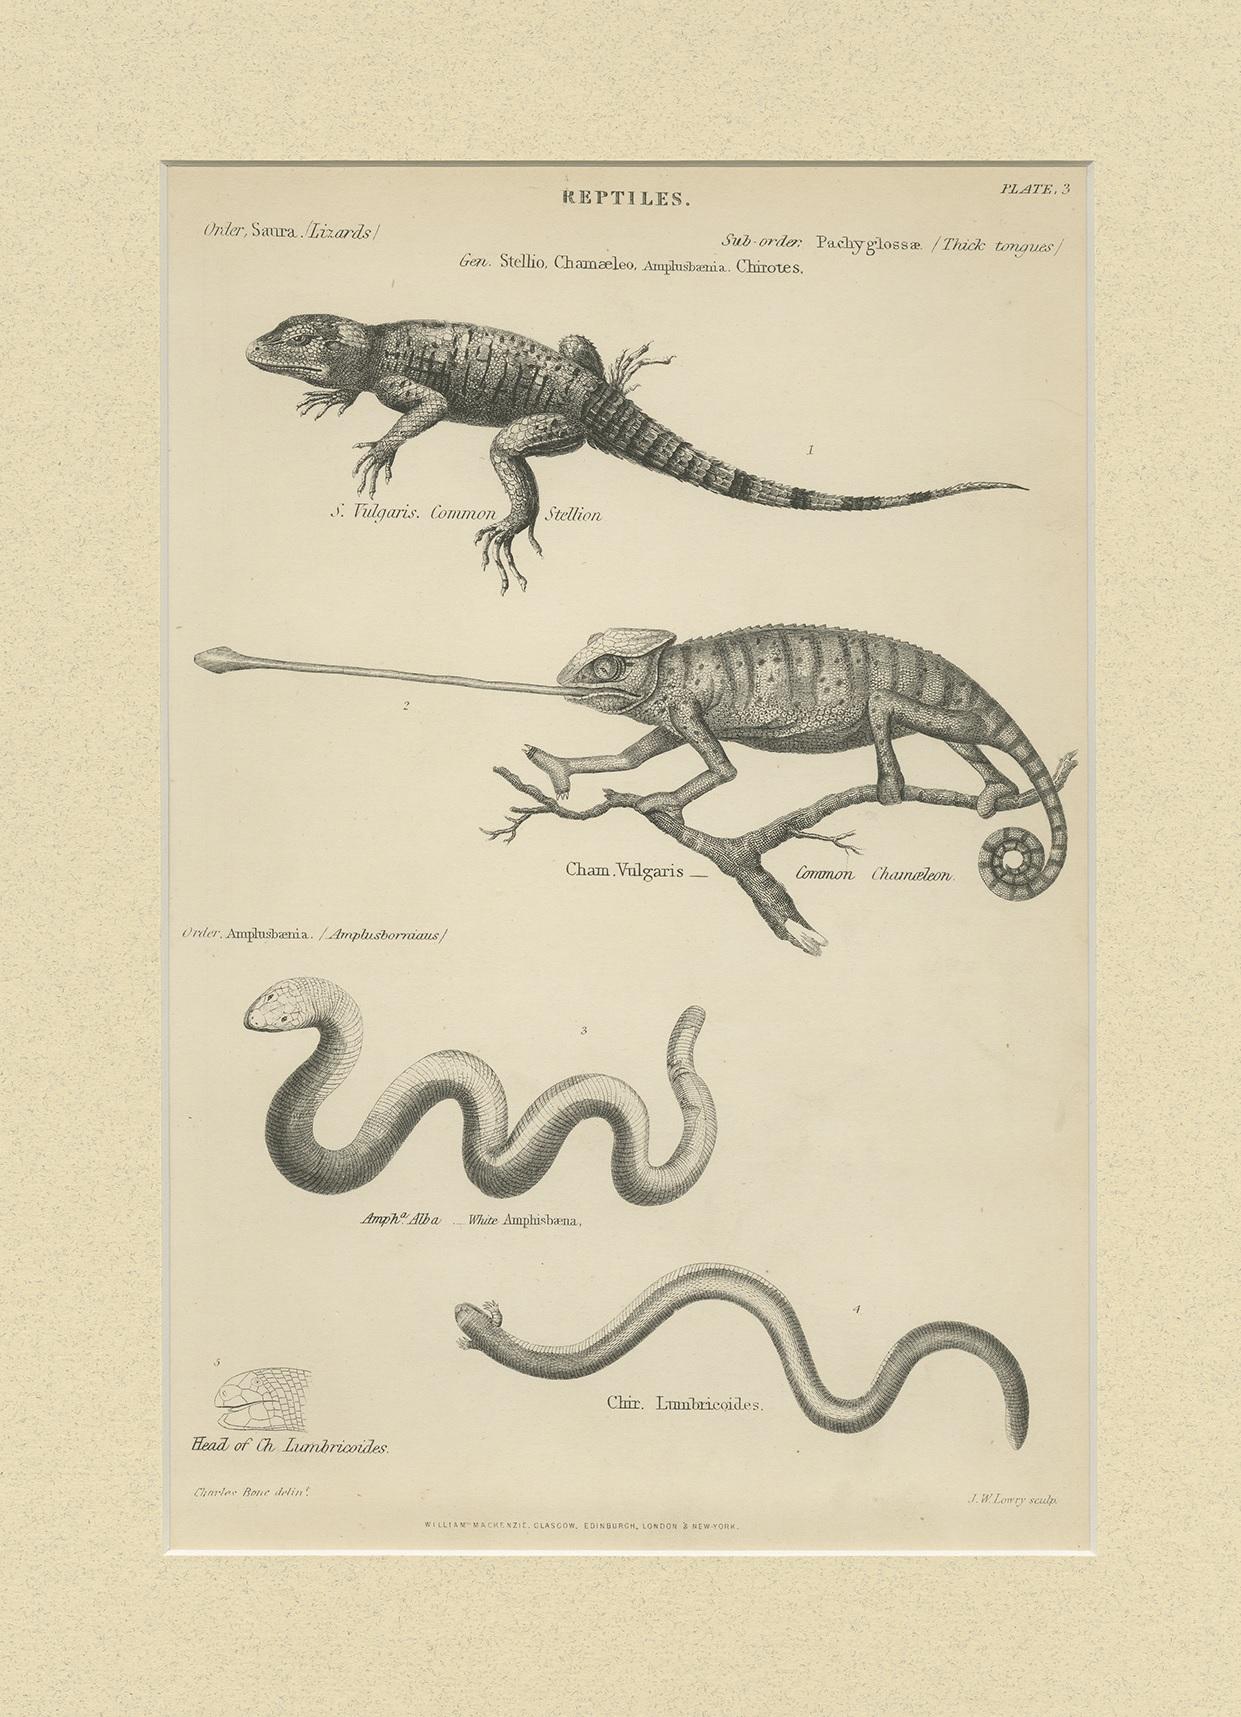 pictures of reptiles to print